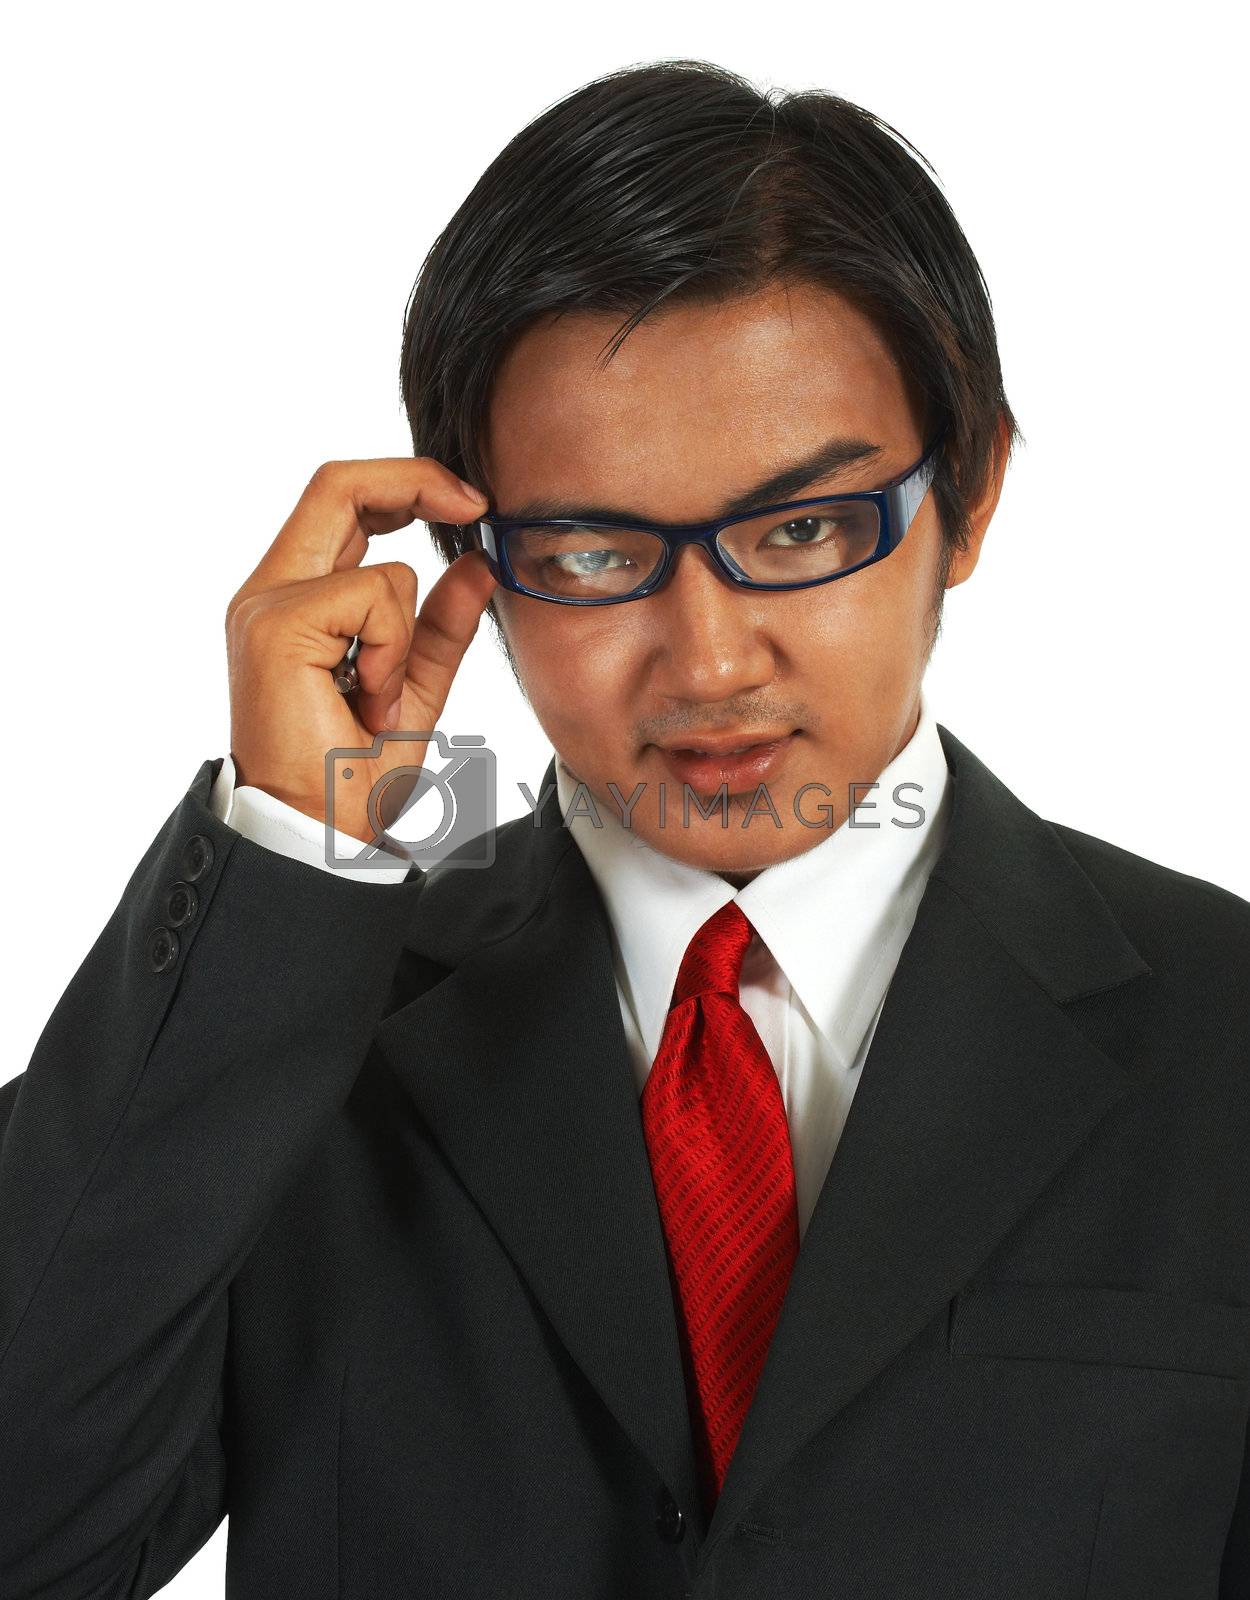 Businessman In Suit And Tie Wearing Glasses